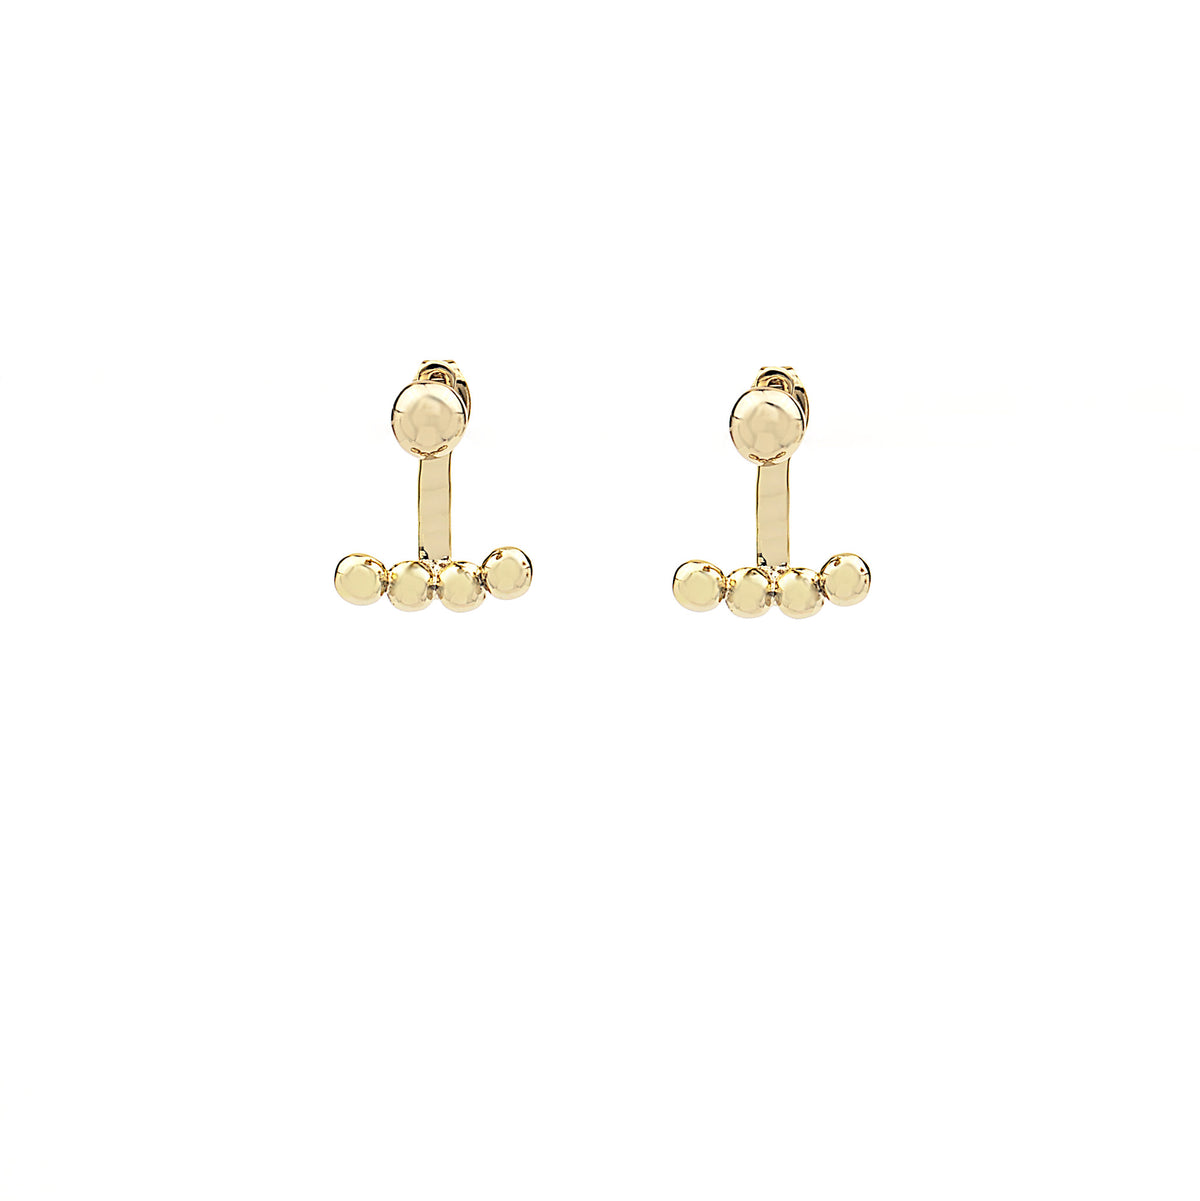 the incredible two in one ear jacket earring